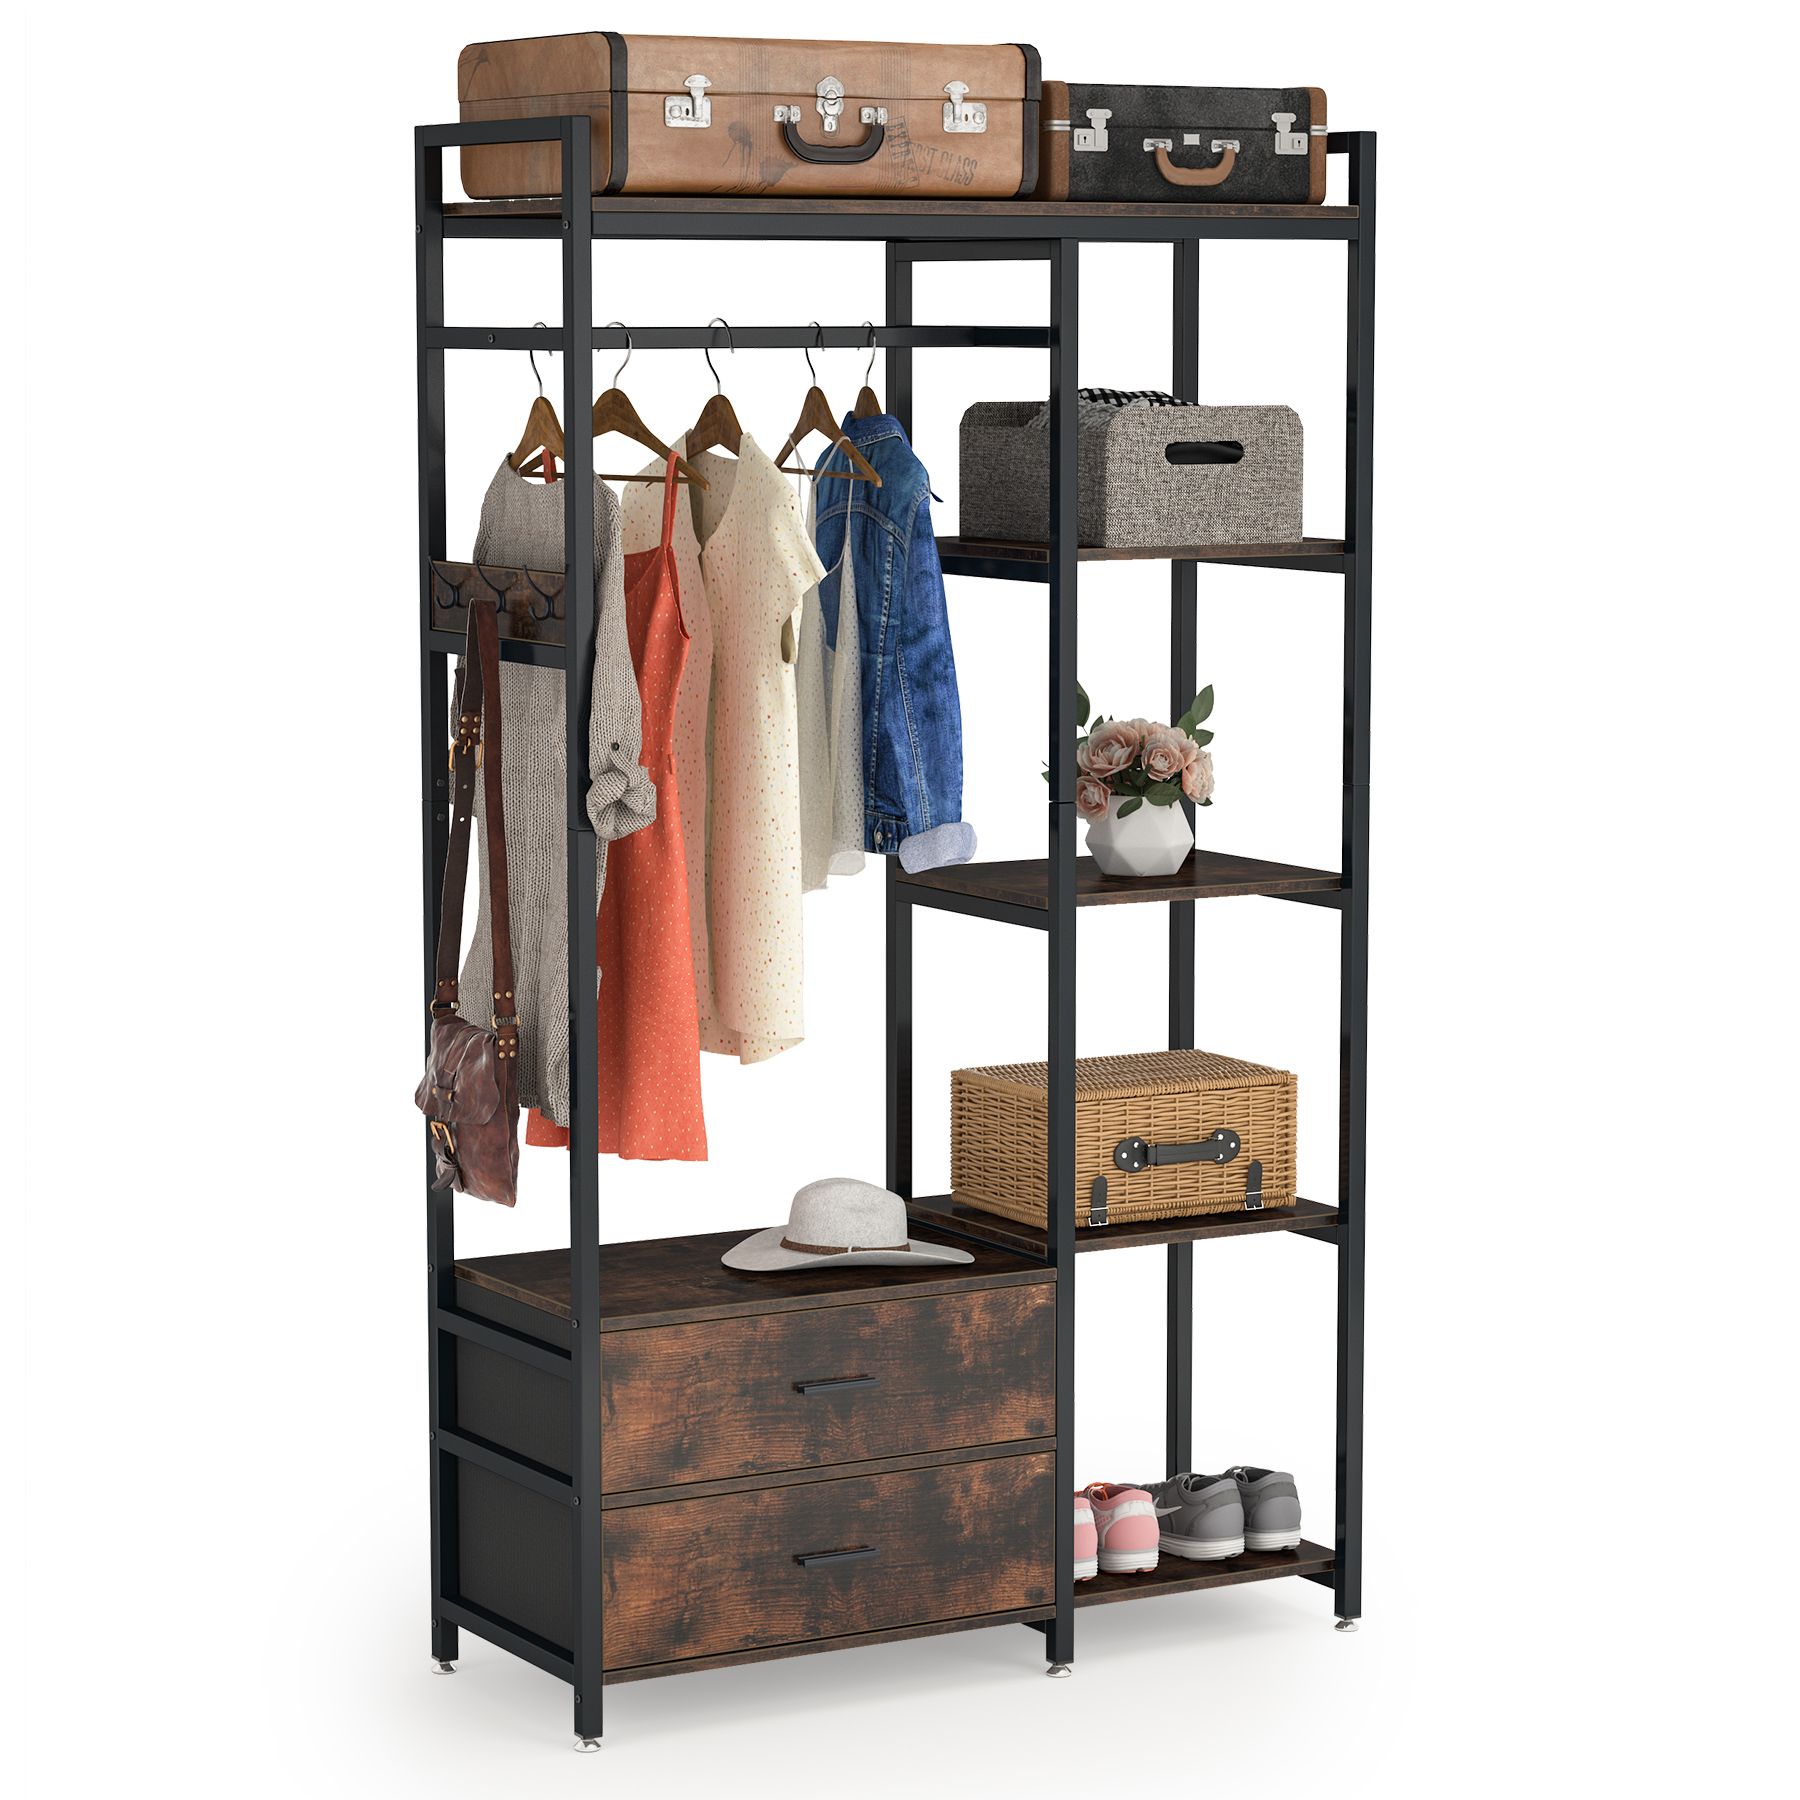 Tribesigns Free-Standing Closet Organizer,Heavy Duty Clothes Rack with 6 Shelves and Hanging Bar, Large Closet Storage System & Closet Garment Shelves